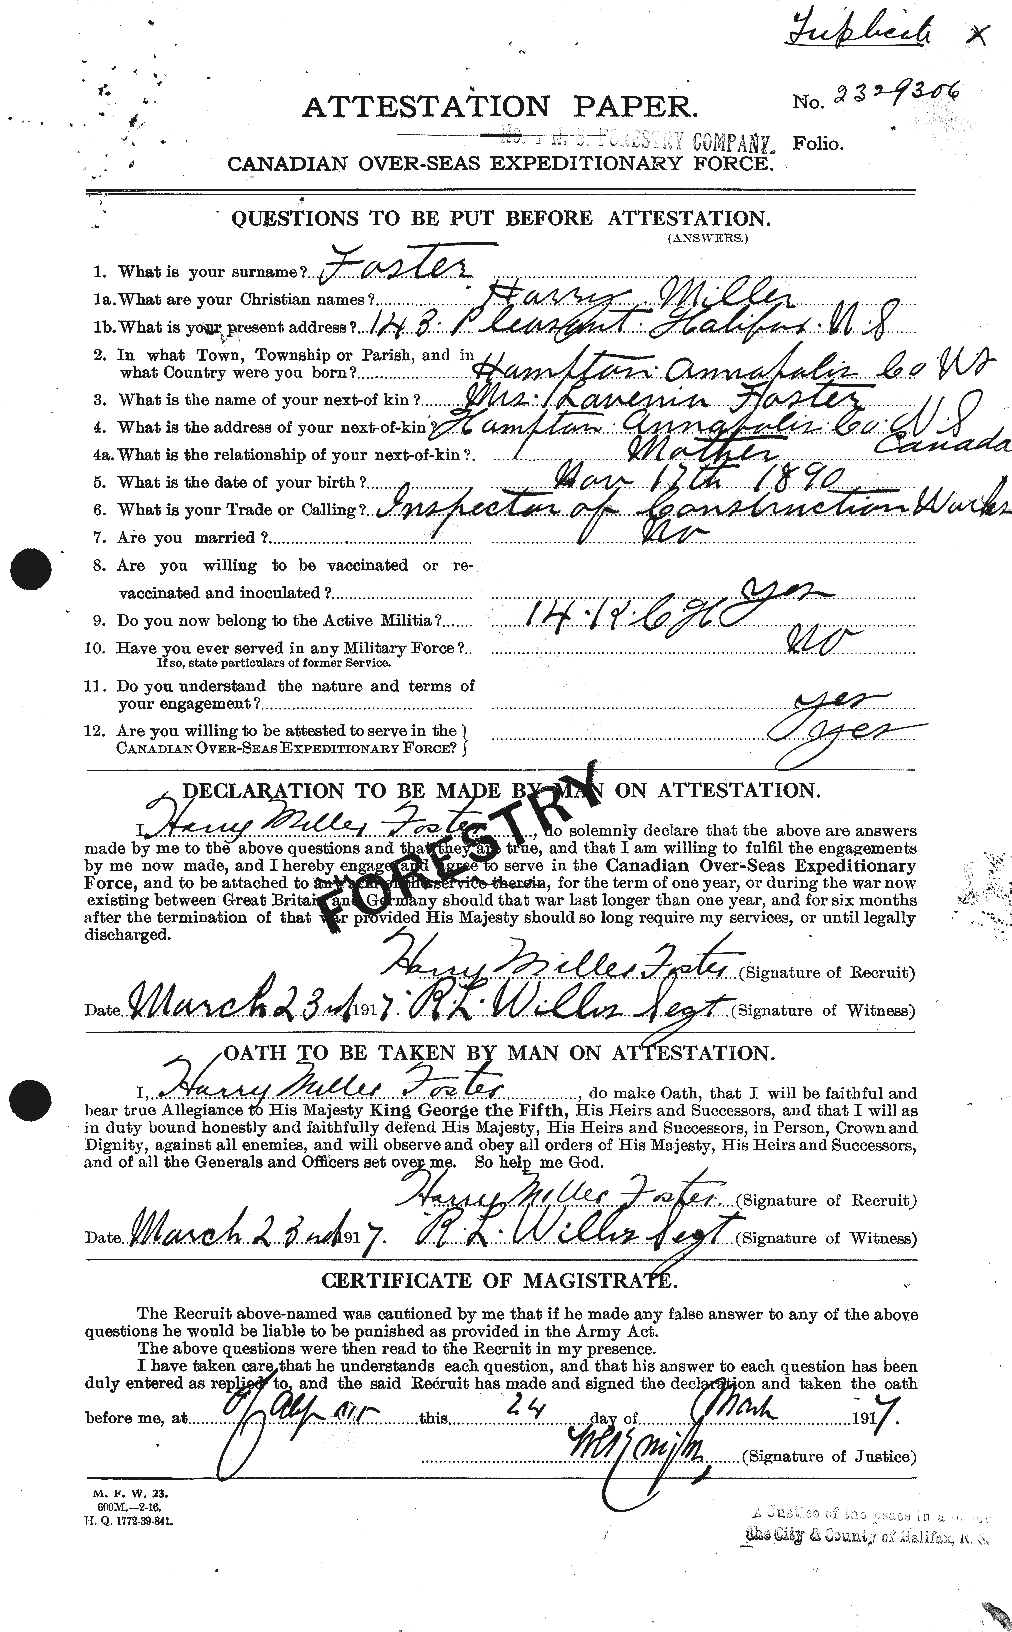 Personnel Records of the First World War - CEF 333232a